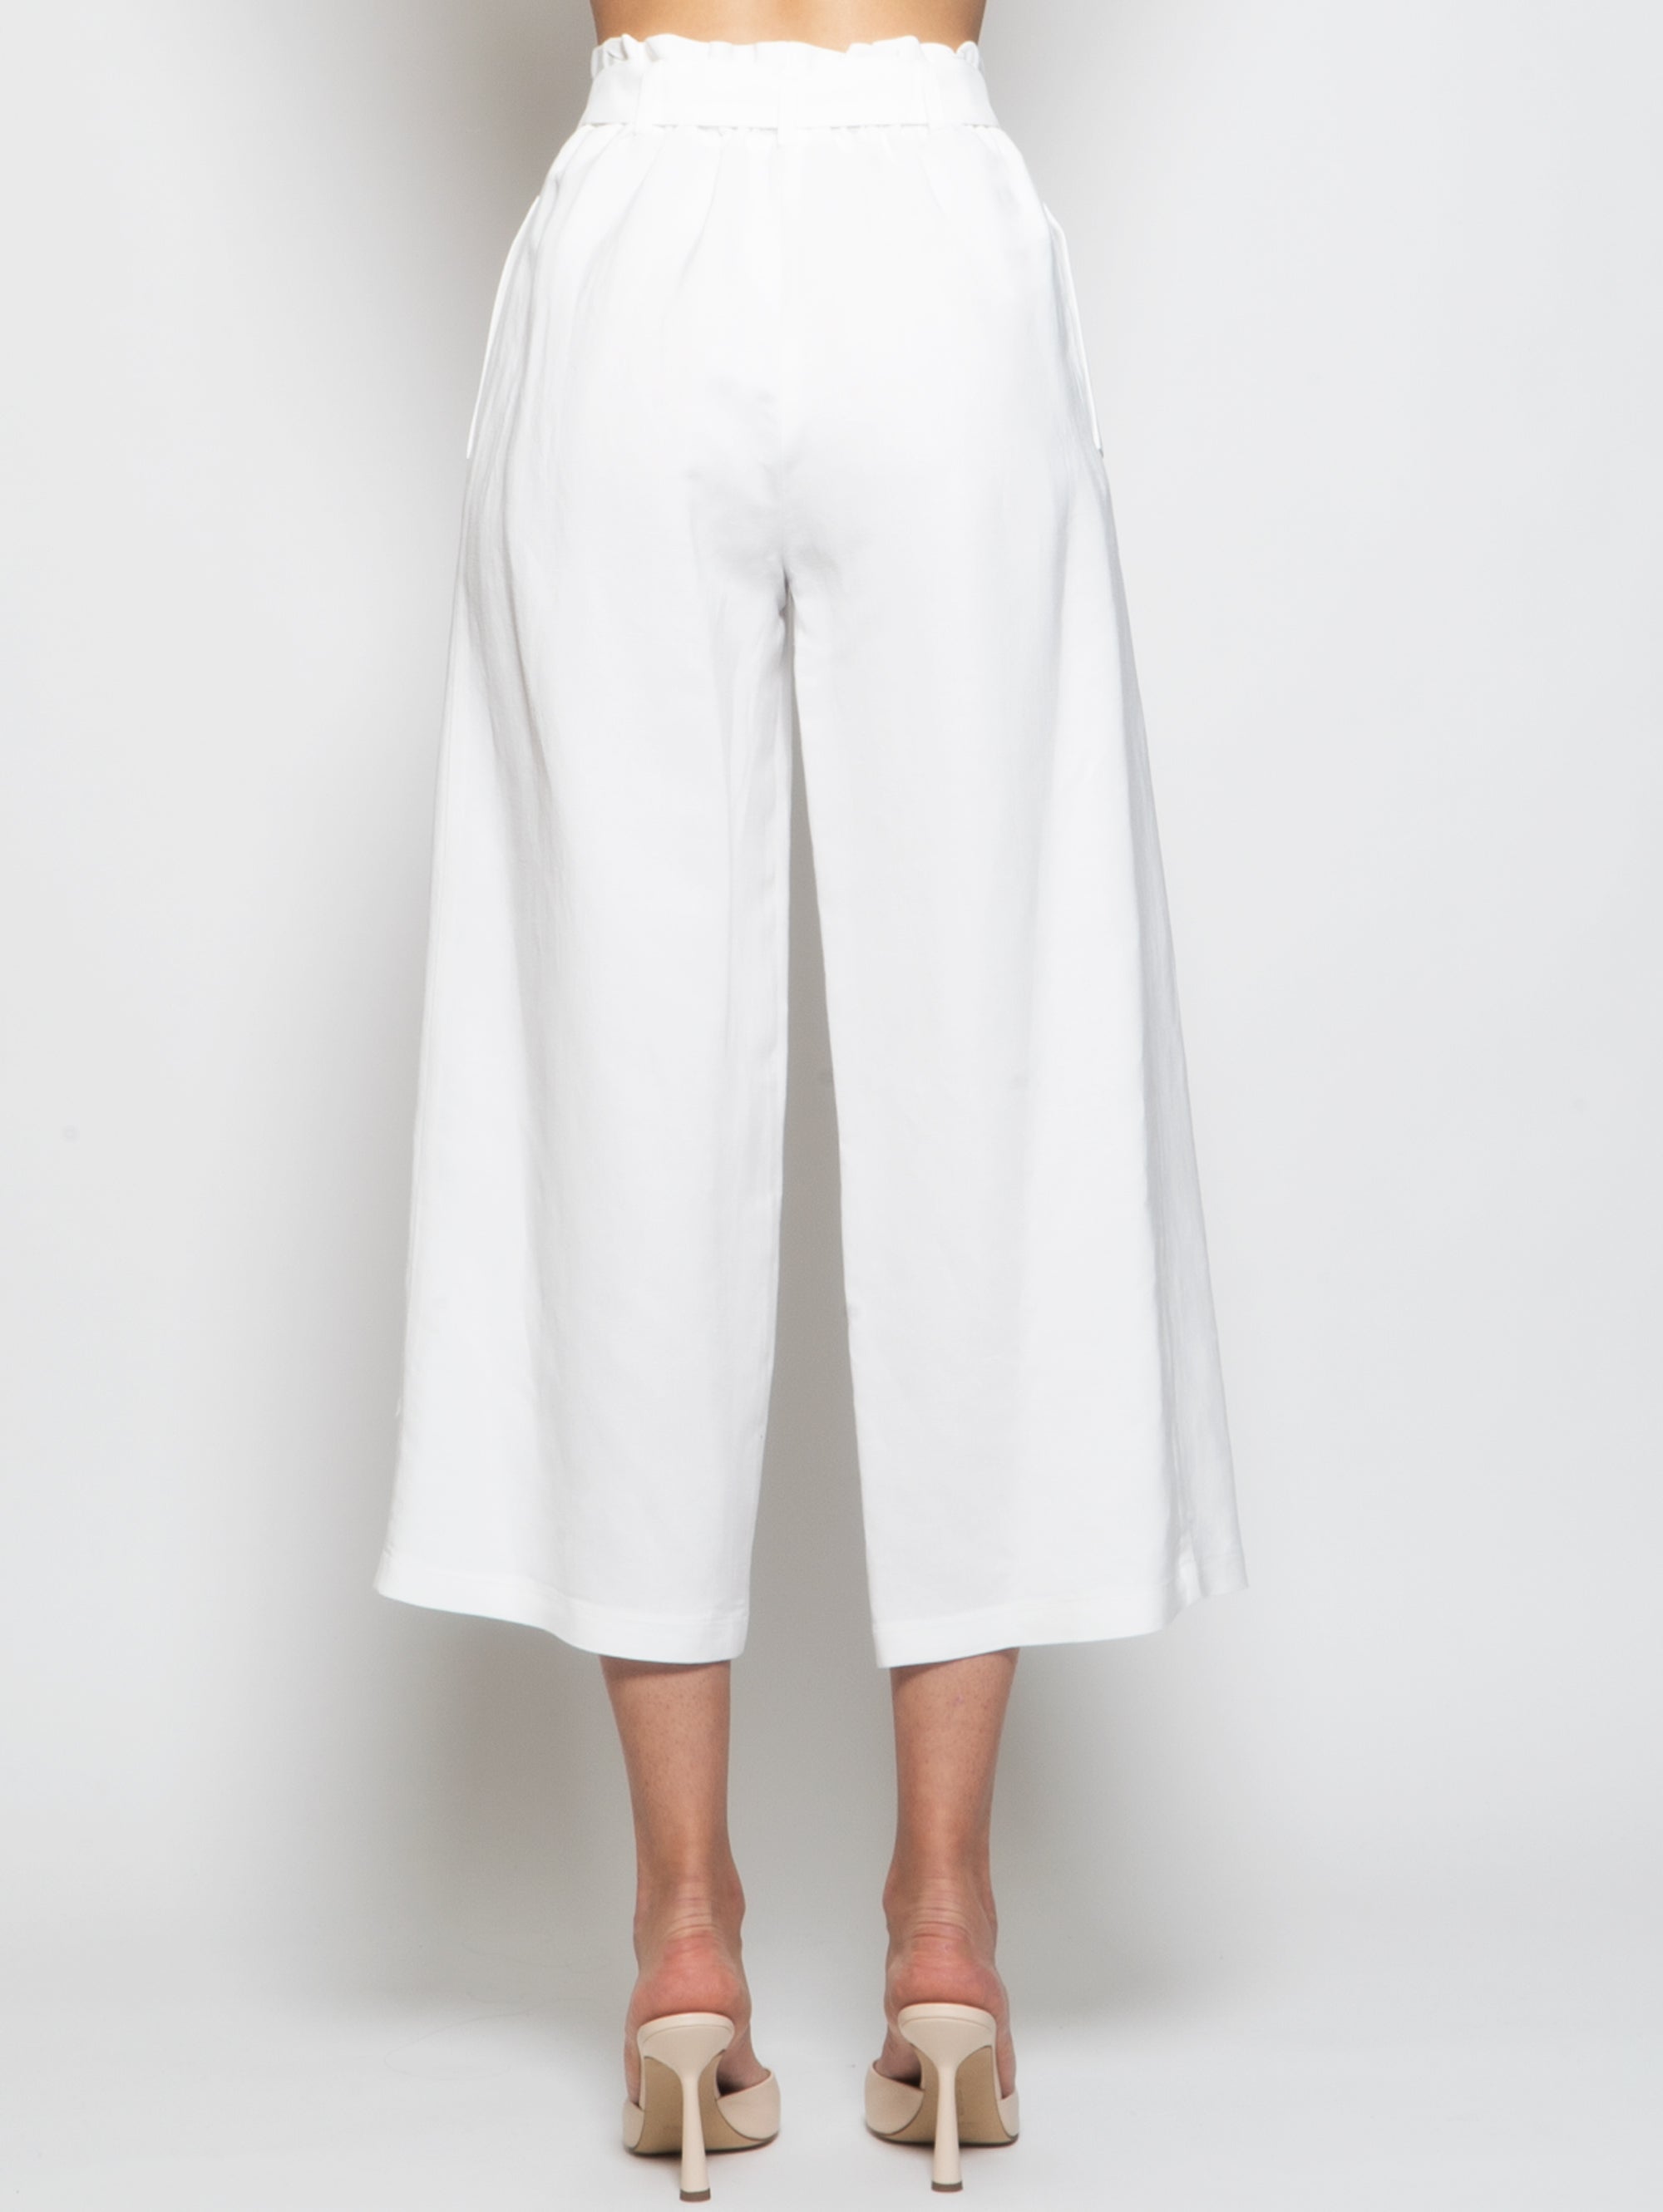 Cropped Pants in White Linen Blend